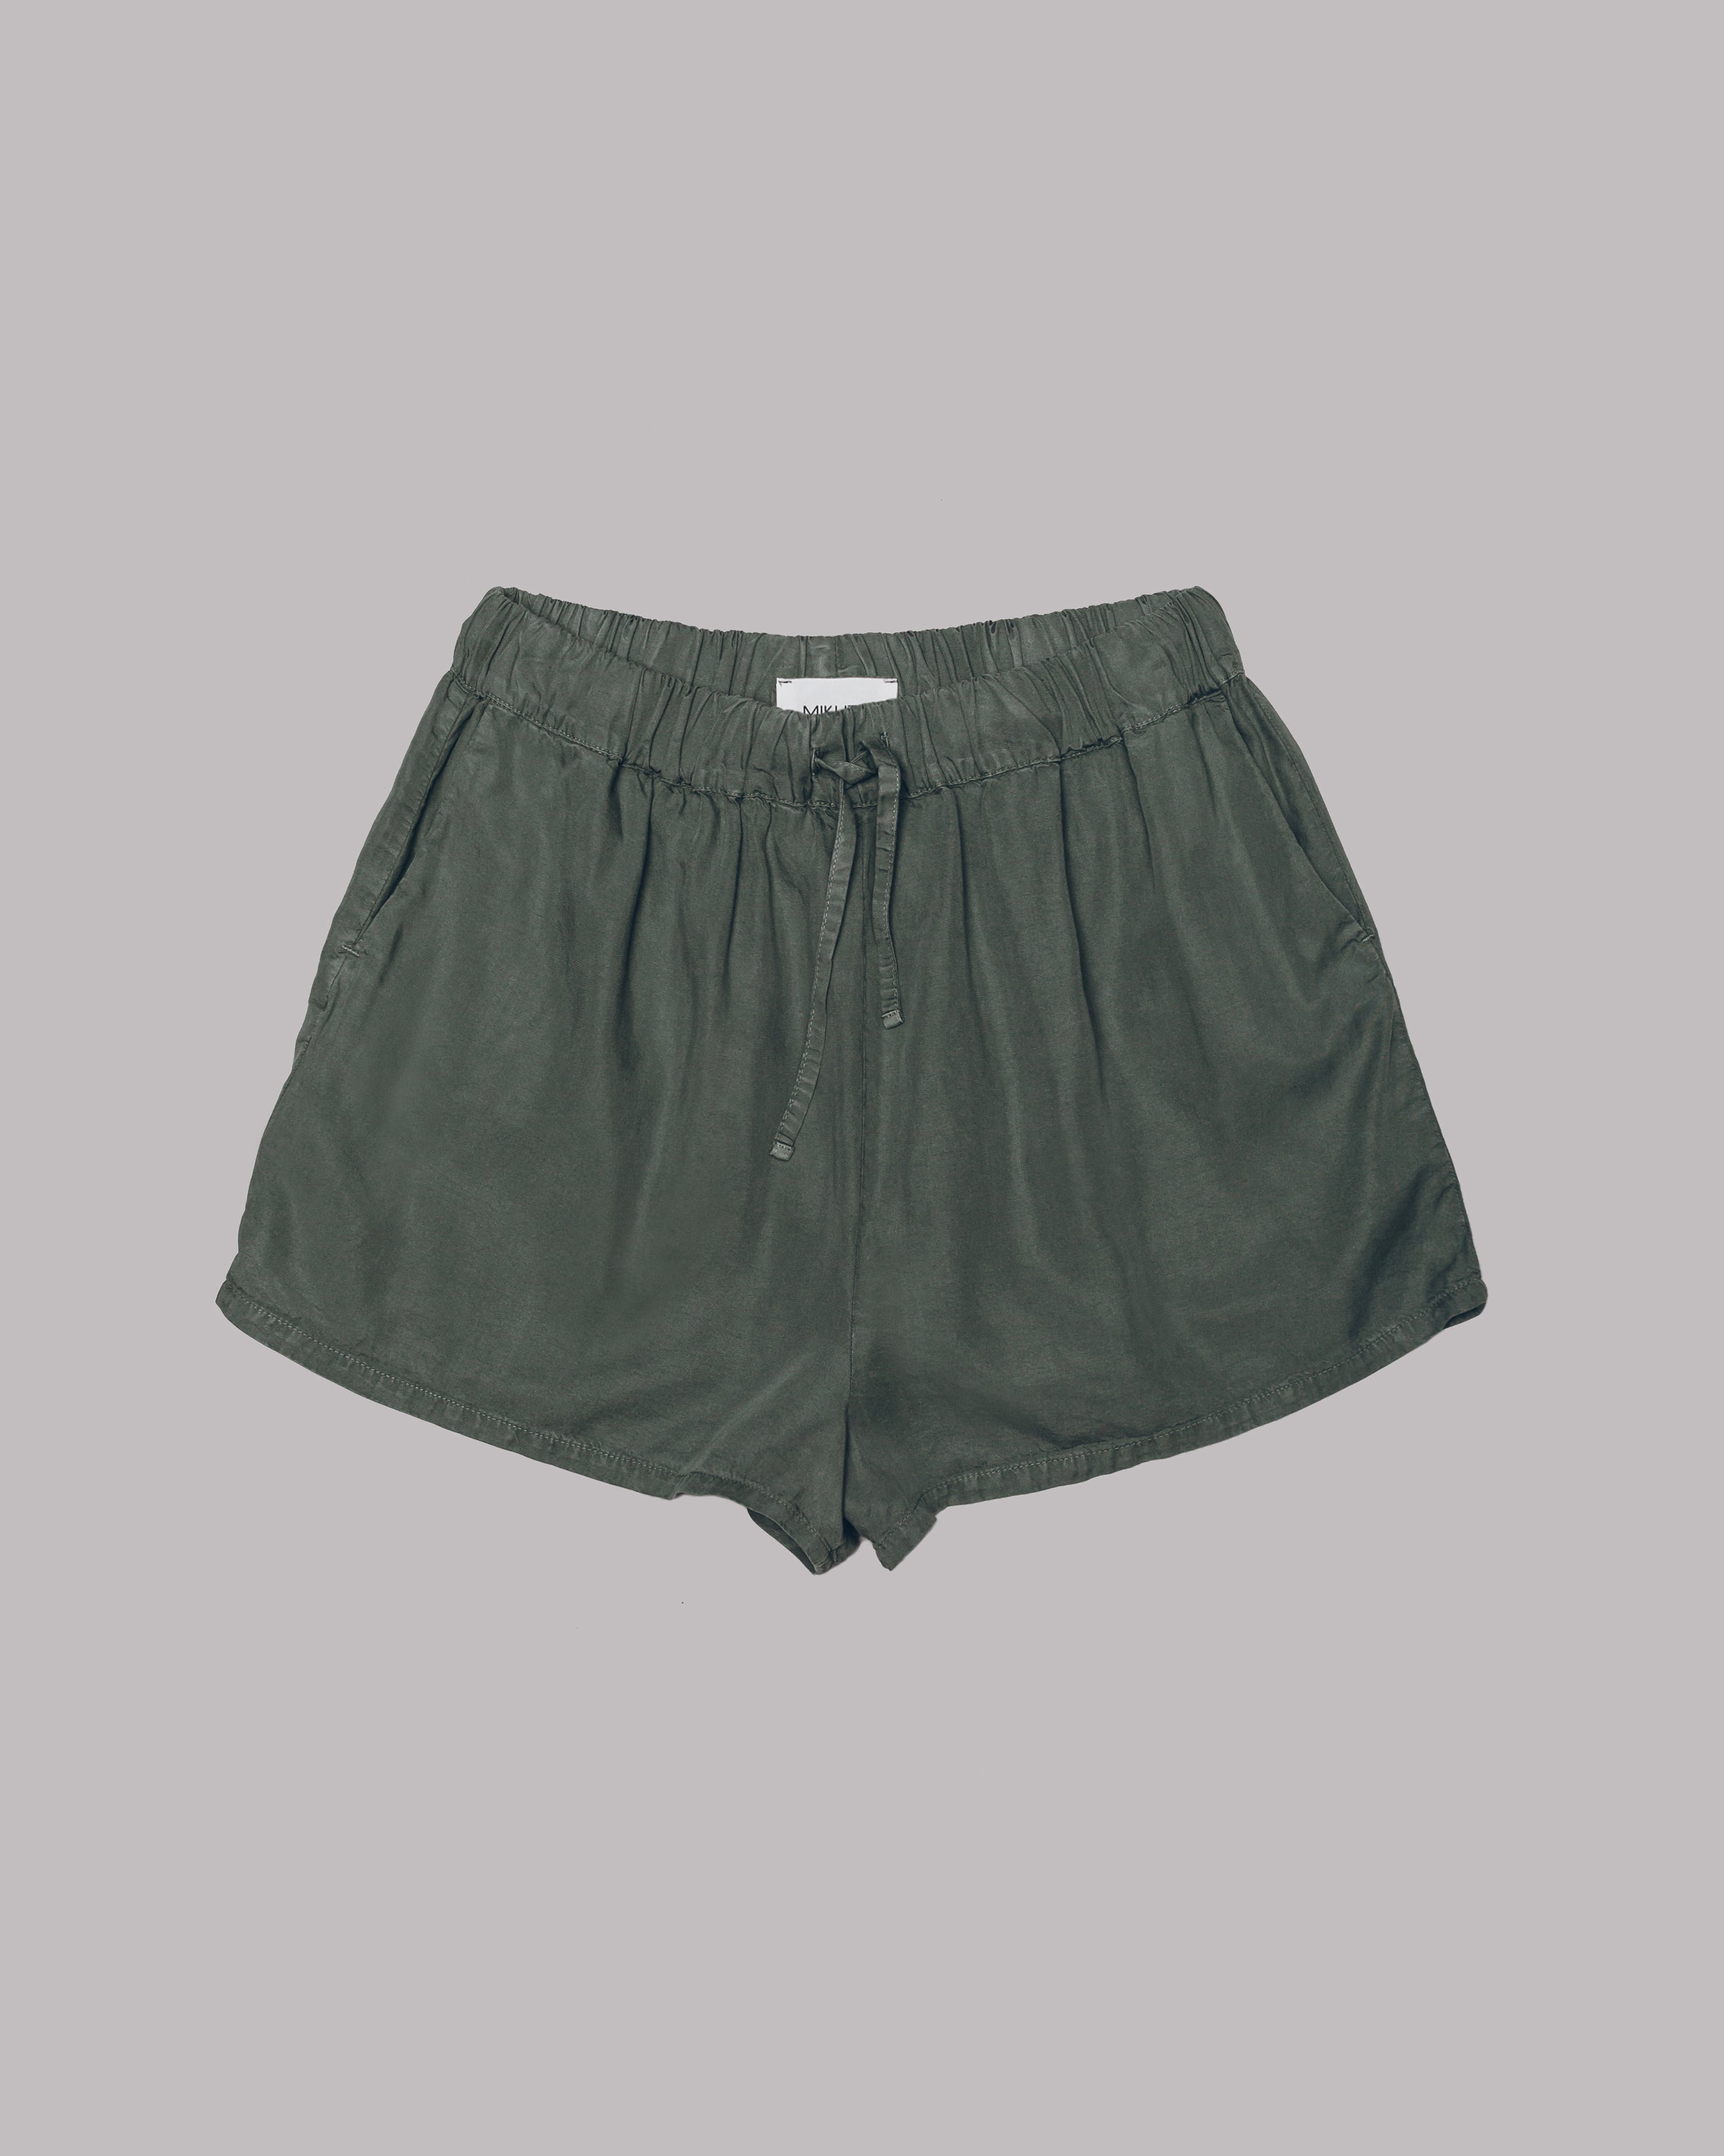 The Green Co-Ord Shorts